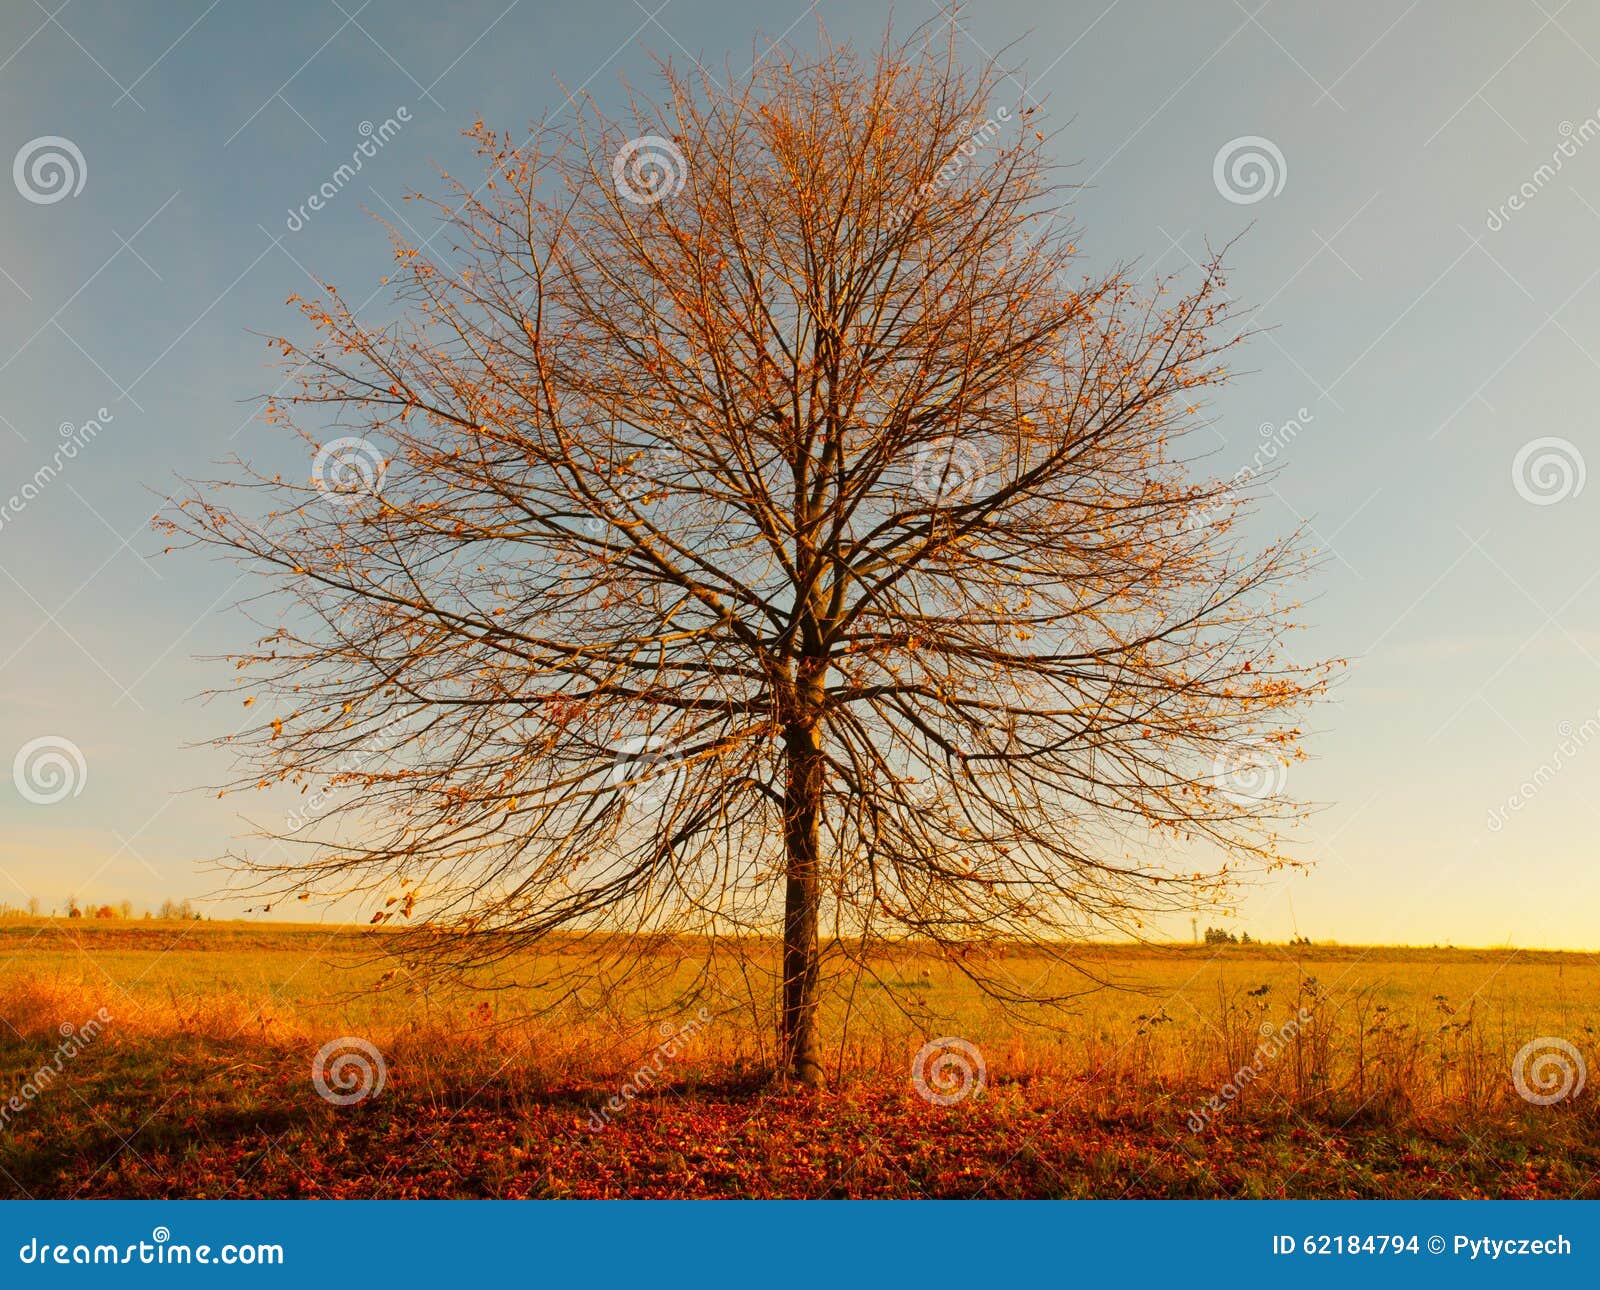 Lonesome Autumn Tree Without Leaves Stock Photo Image Of Foliage